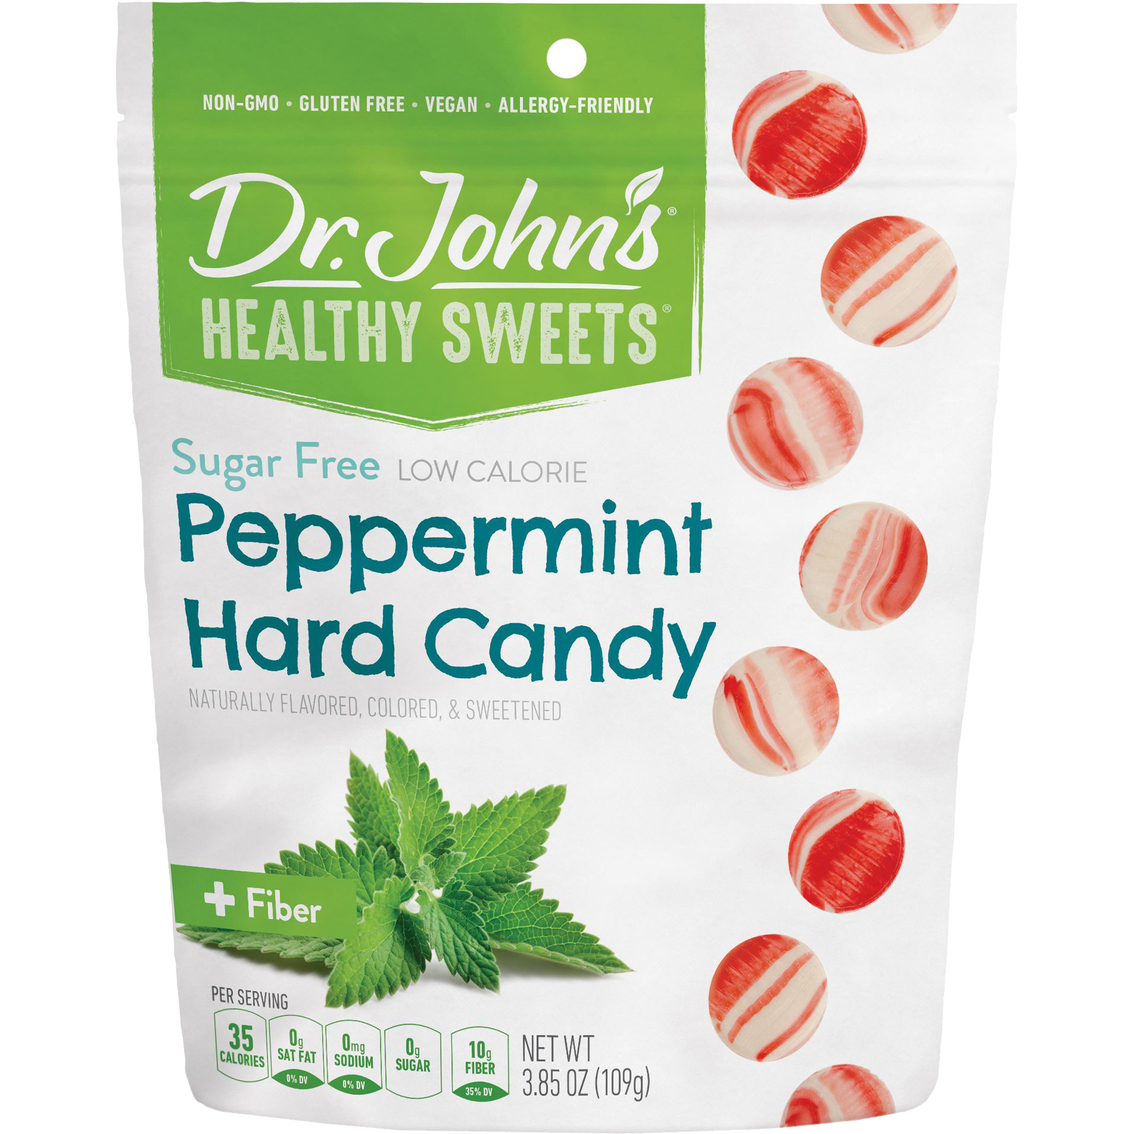 Dr. John's Healthy Sweets Peppermint Hard Candy 10 bags